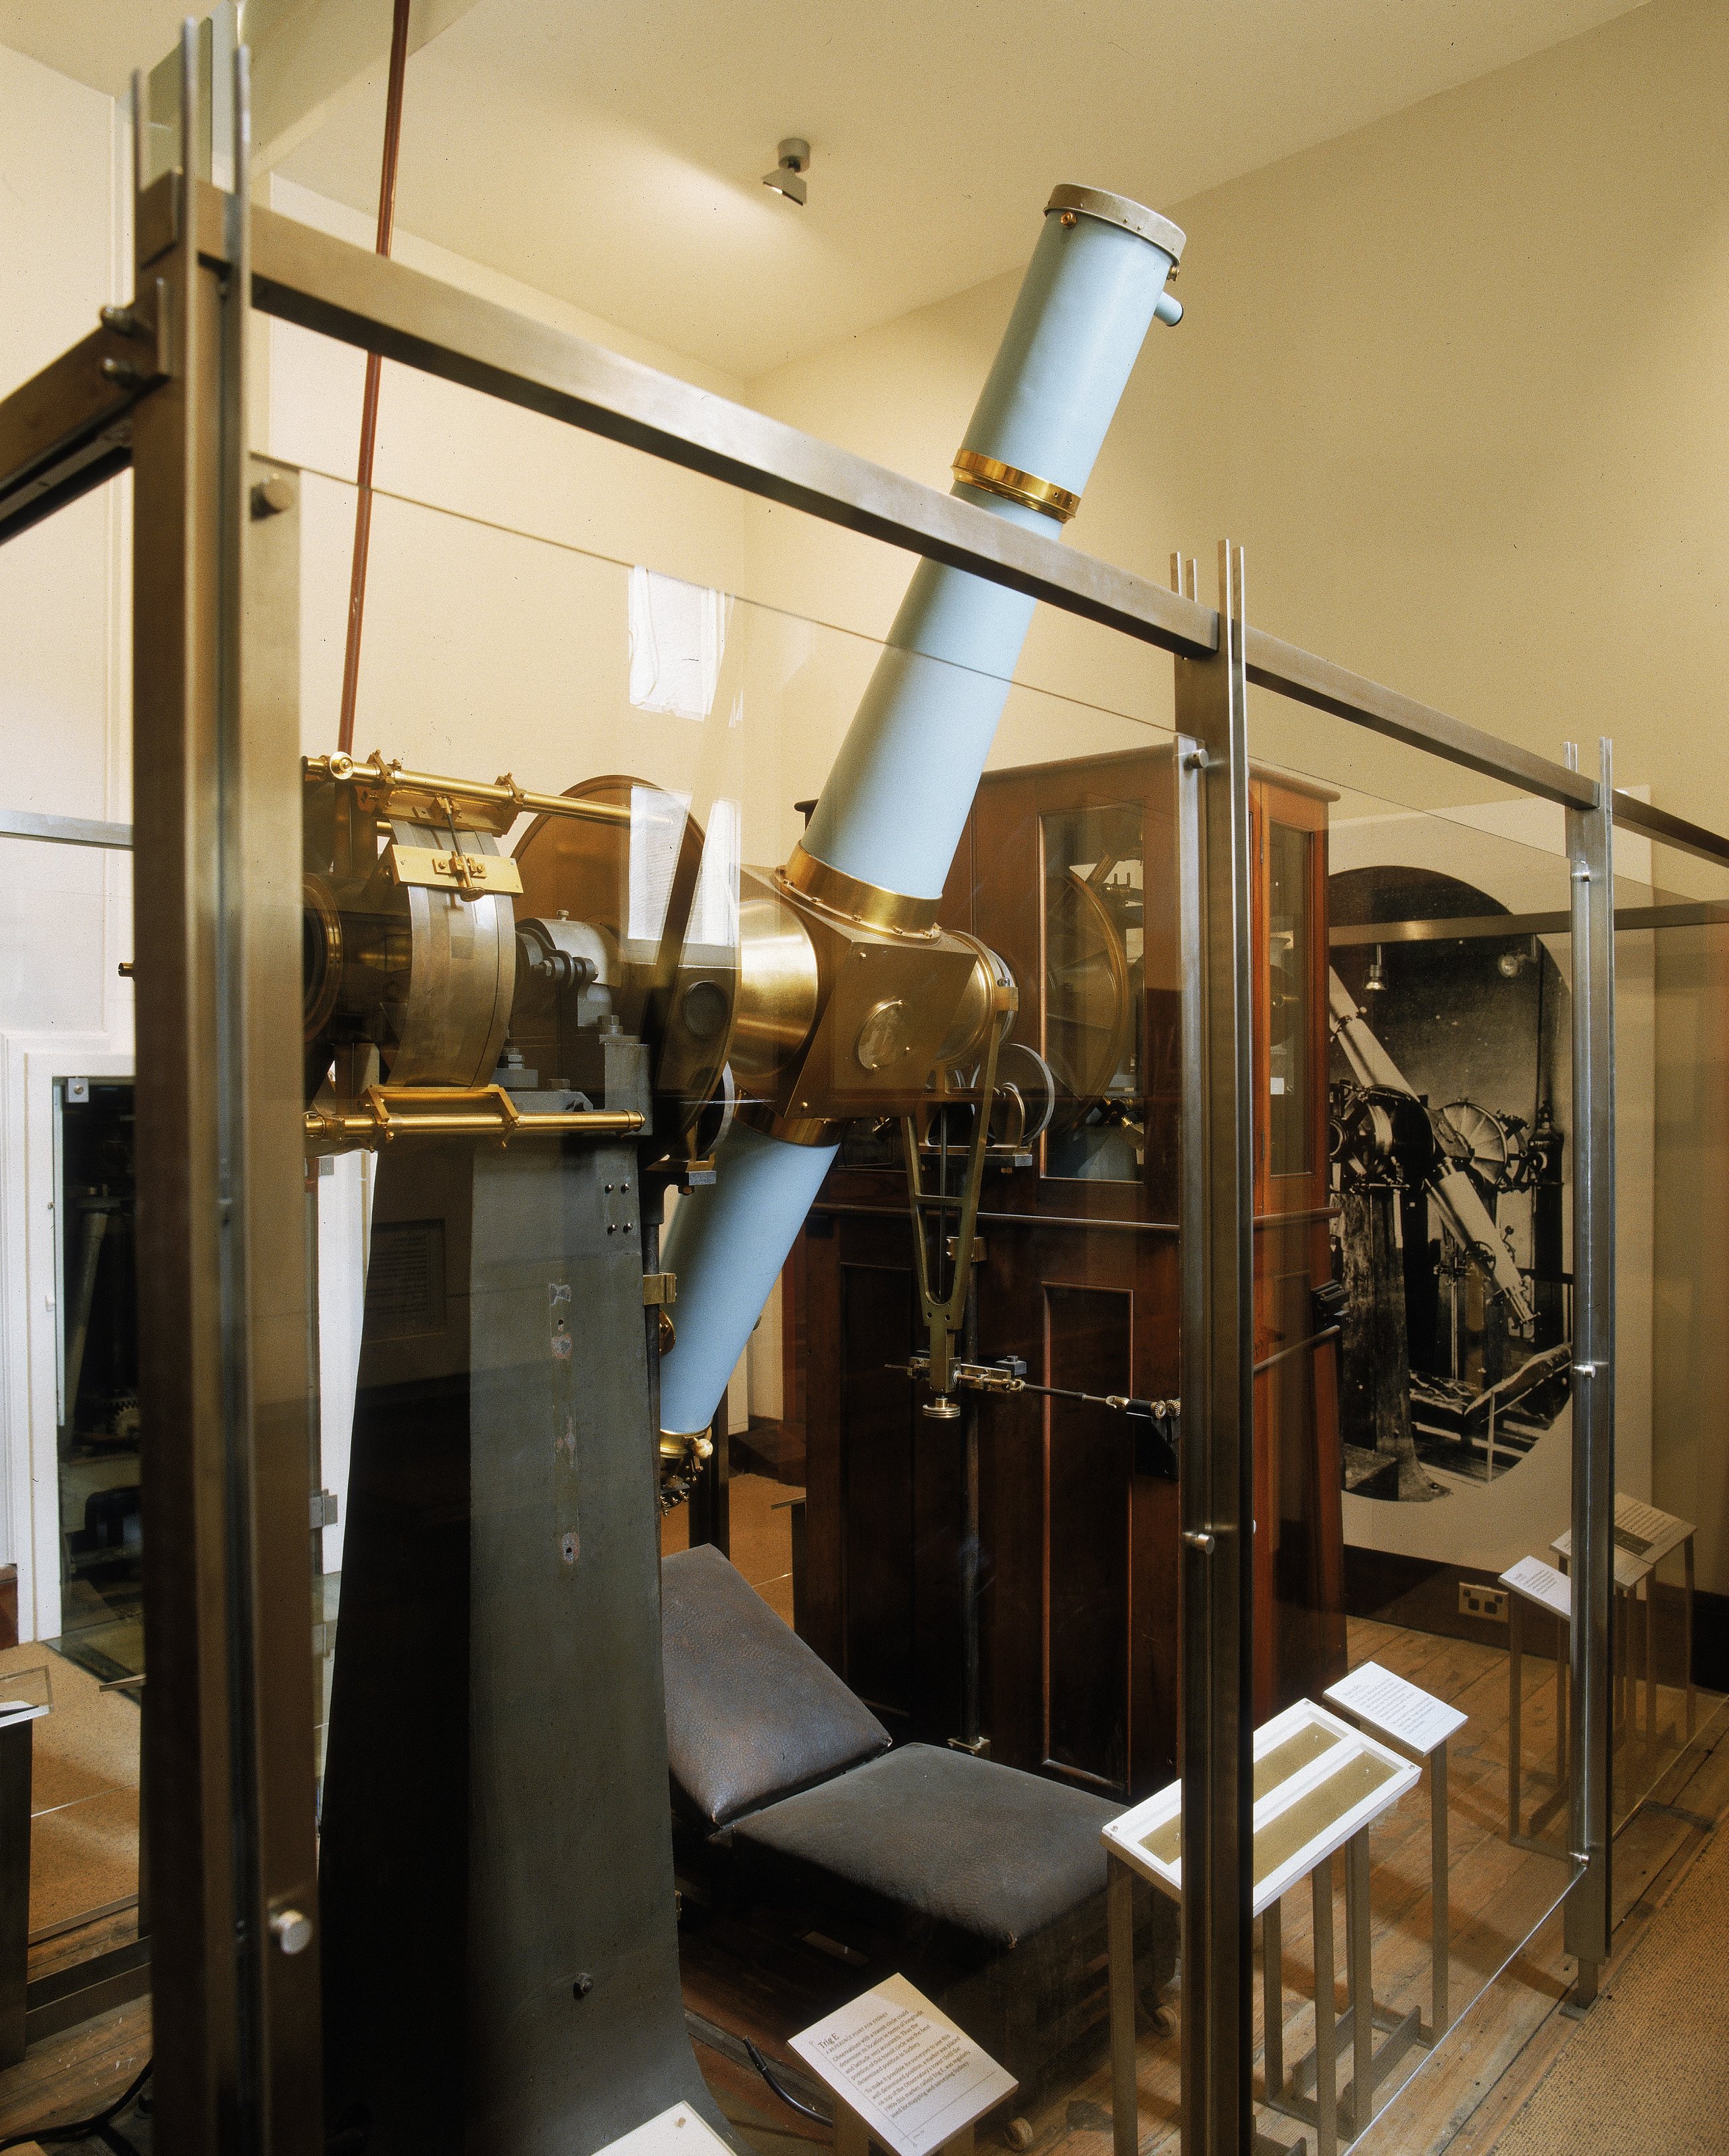 6 inch refracting transit telescope made by Troughton and Simms